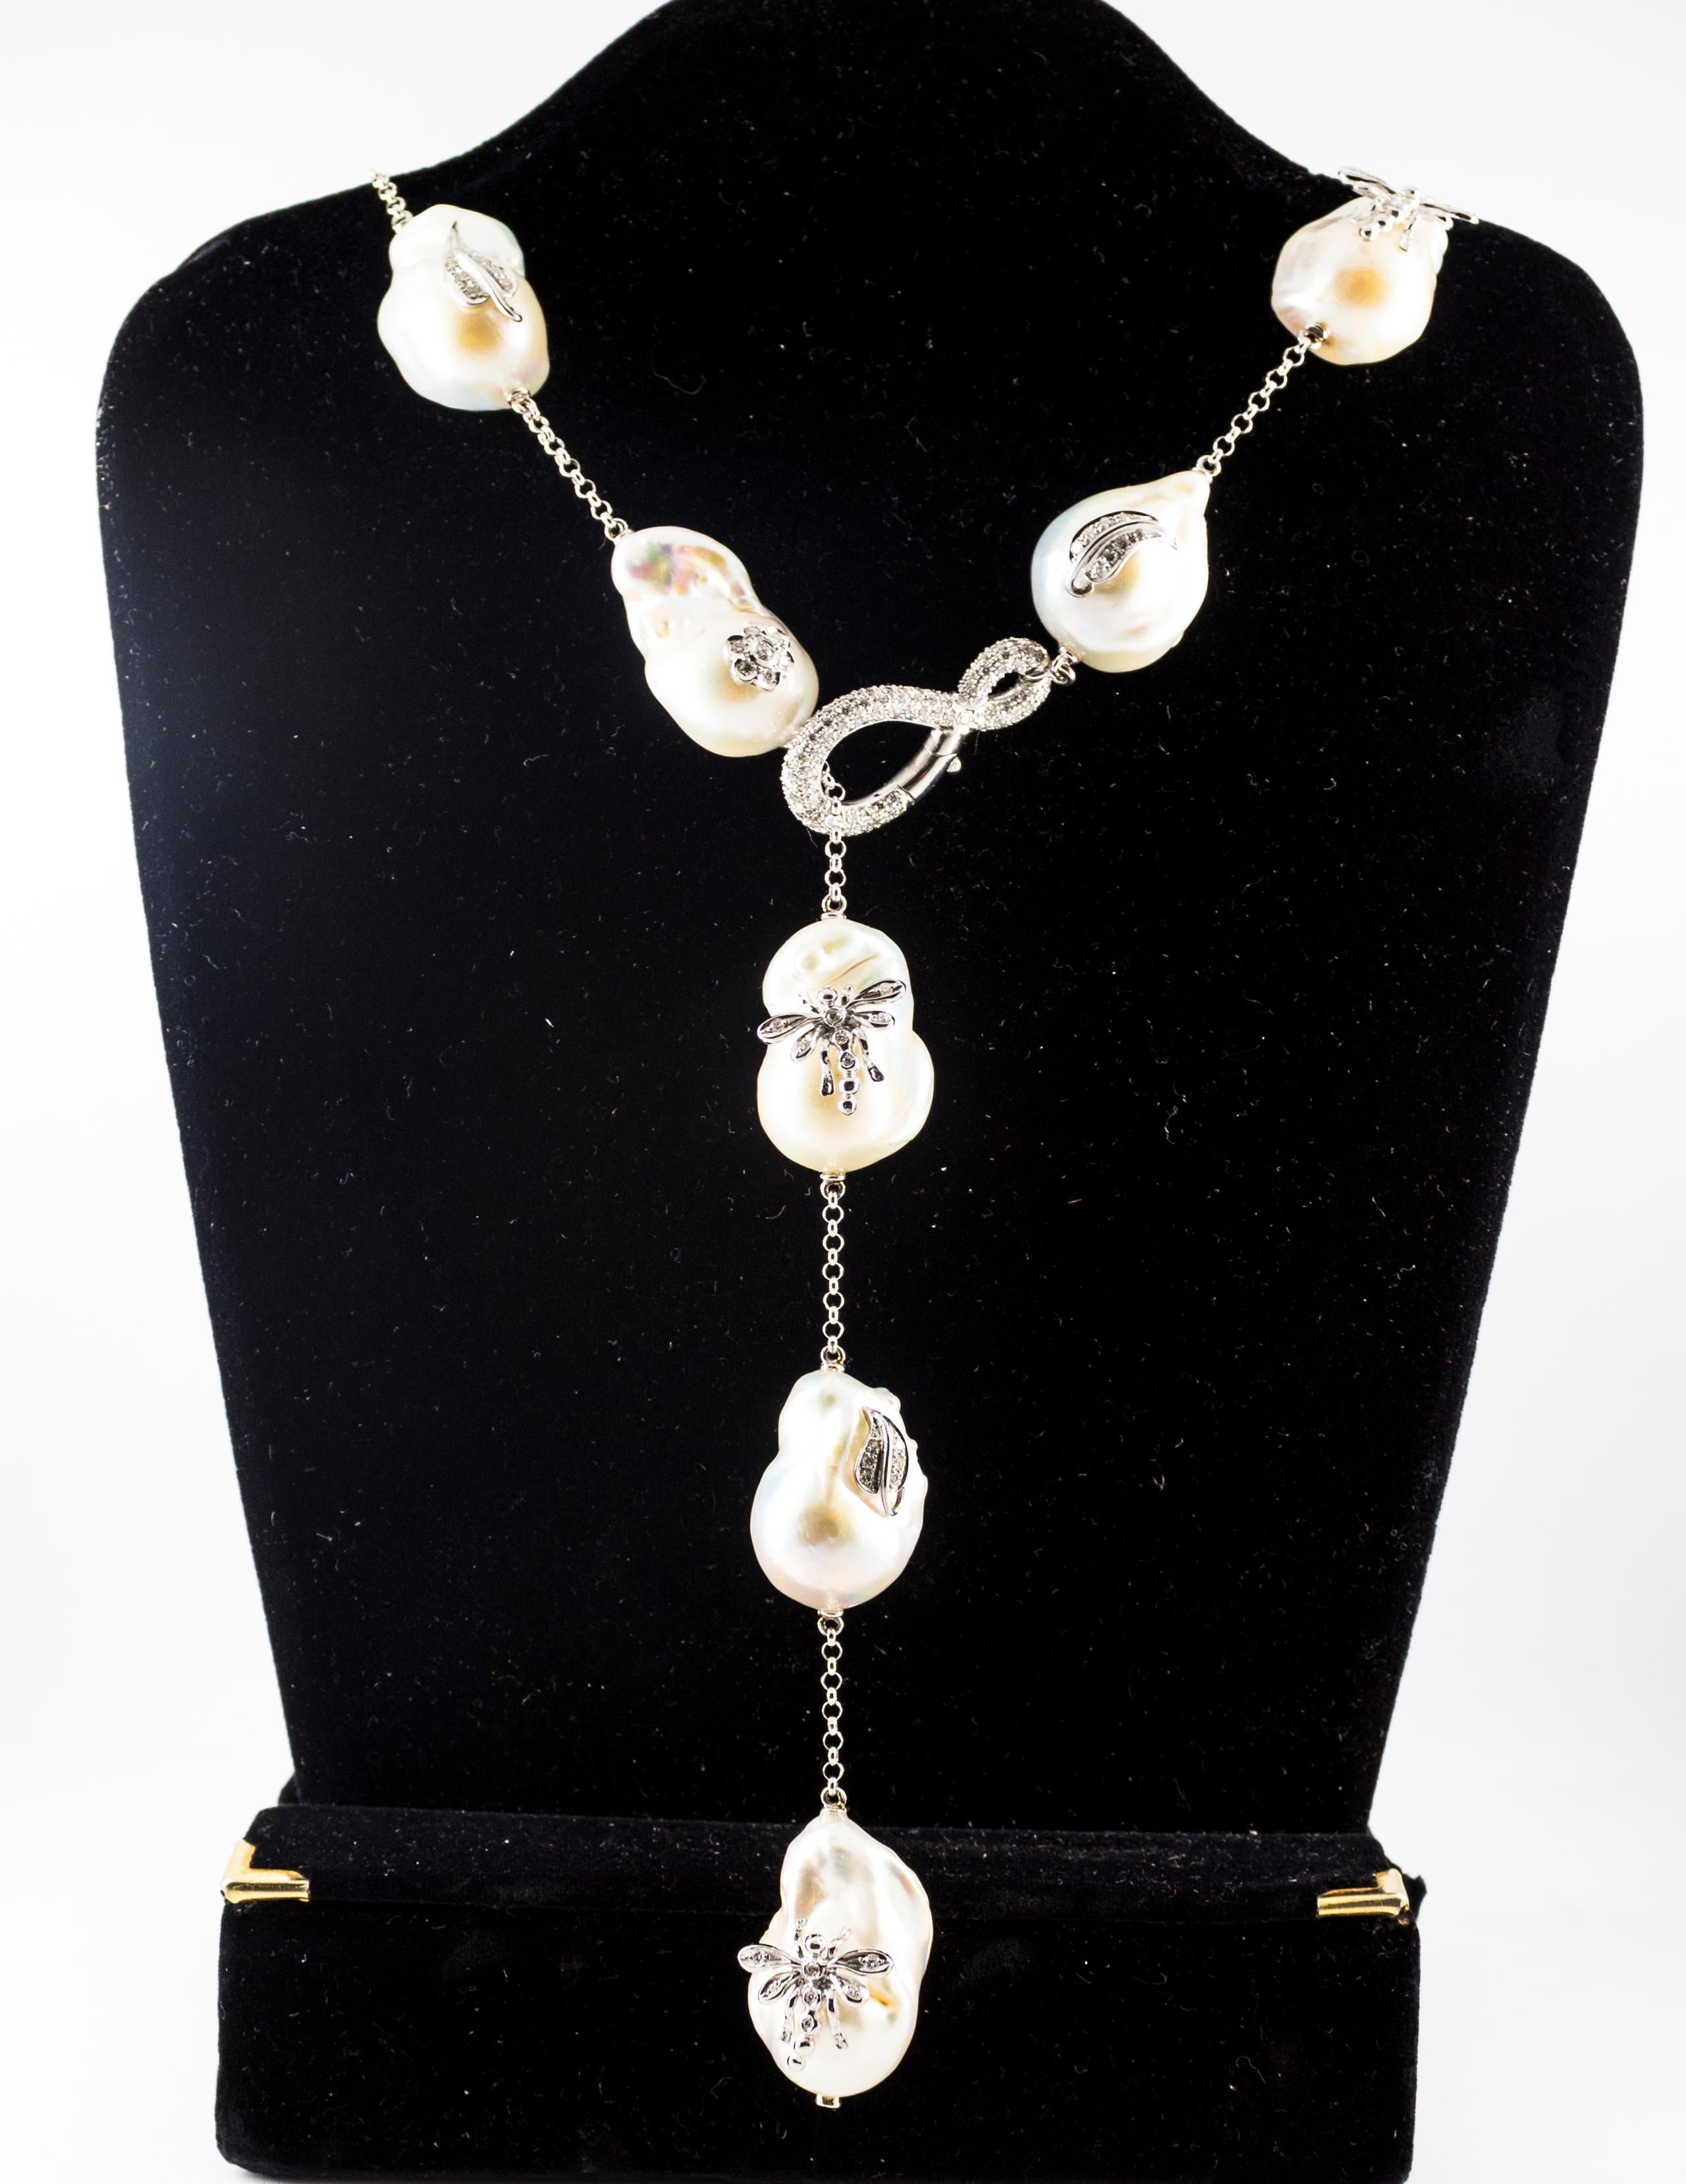 This Necklace is made of 18K White Gold.
This Necklace has 1.75 Carats of White Diamonds.
This Necklace has 342.00 Carats of Pearls.
We're a workshop so every piece is handmade, customizable and resizable.